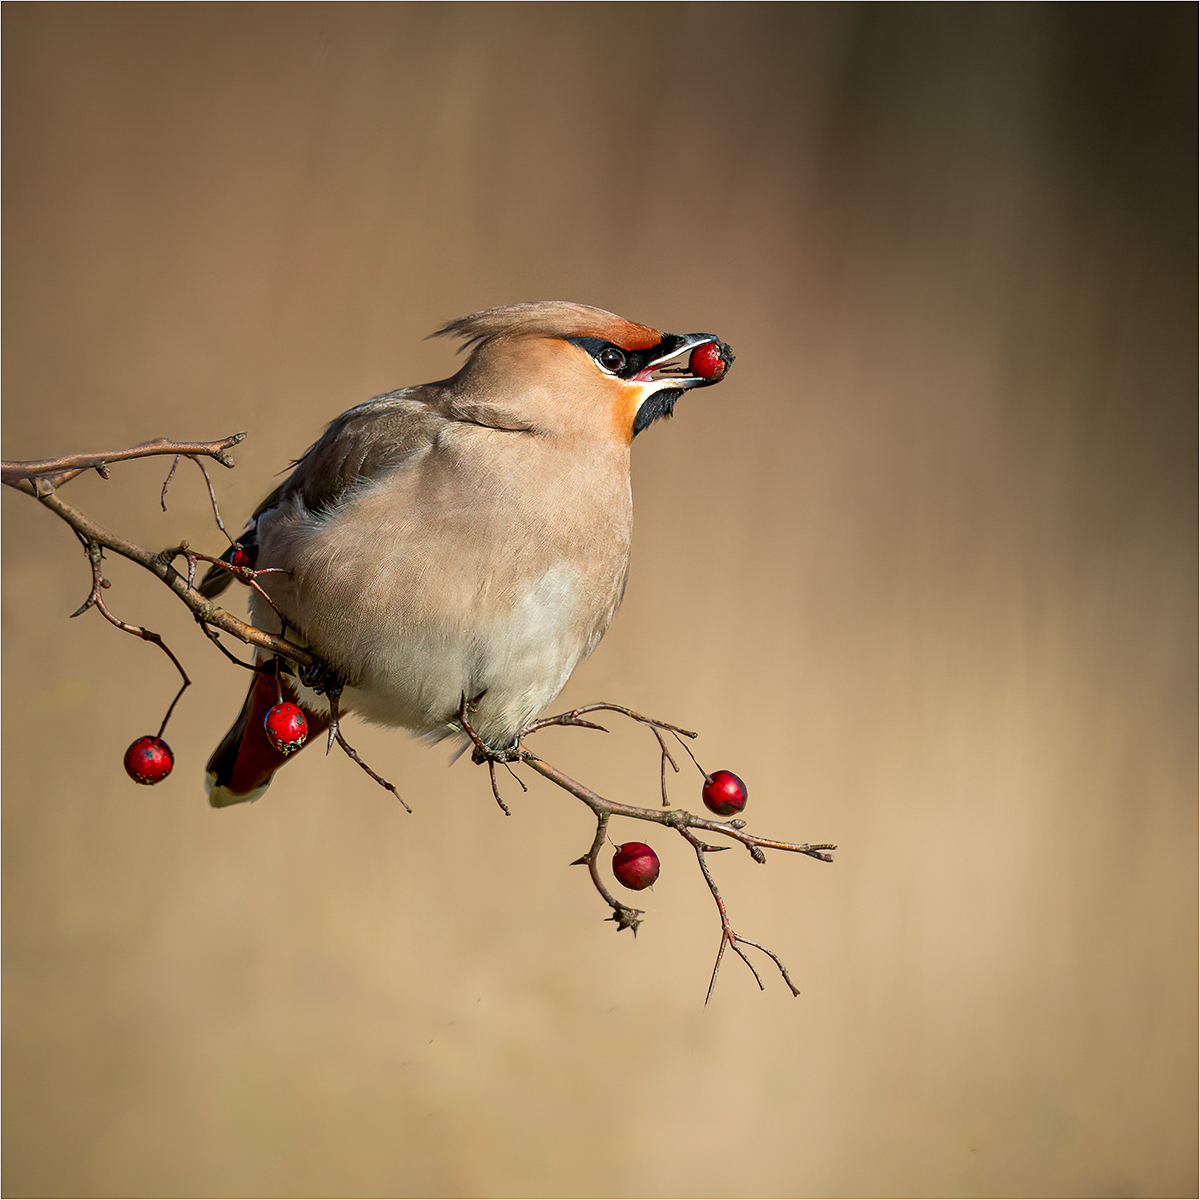 WAXWING WITH RED BERRY by Nigel Stewart